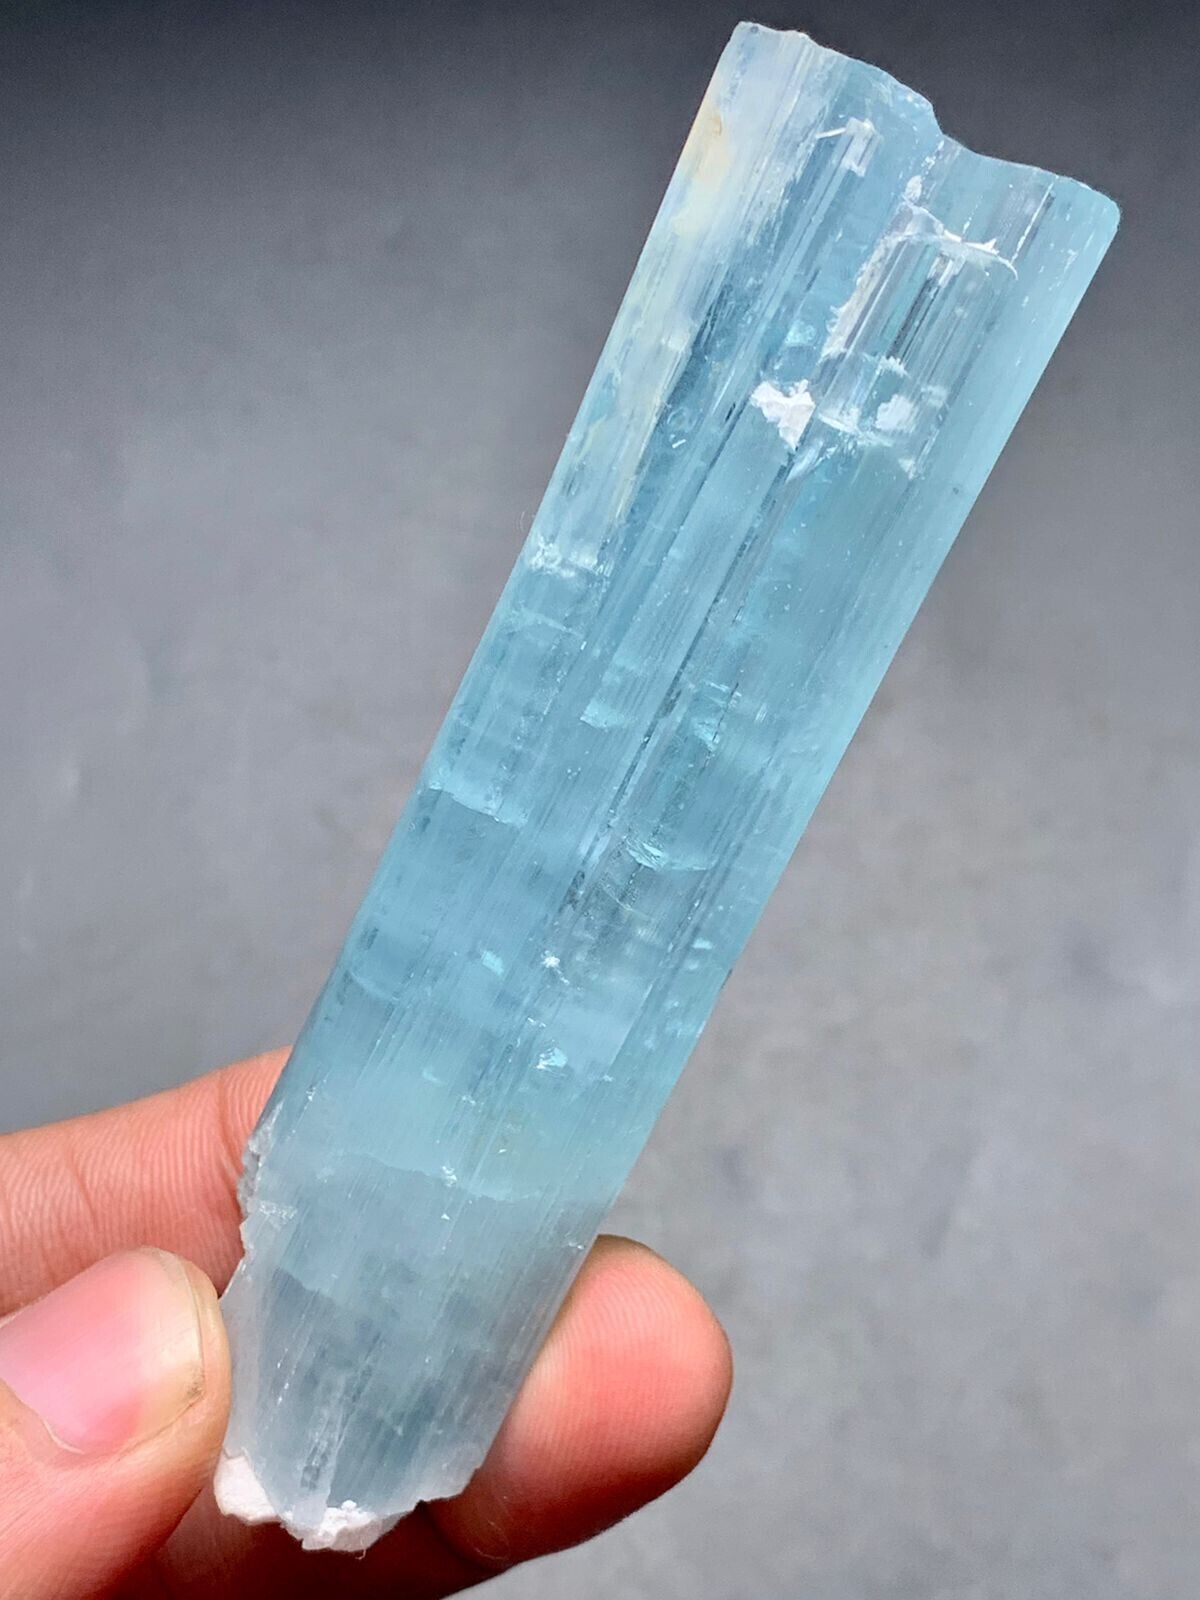 343 Cts Top Quality Terminated Aquamarine Crystal from Skardu Pakistan